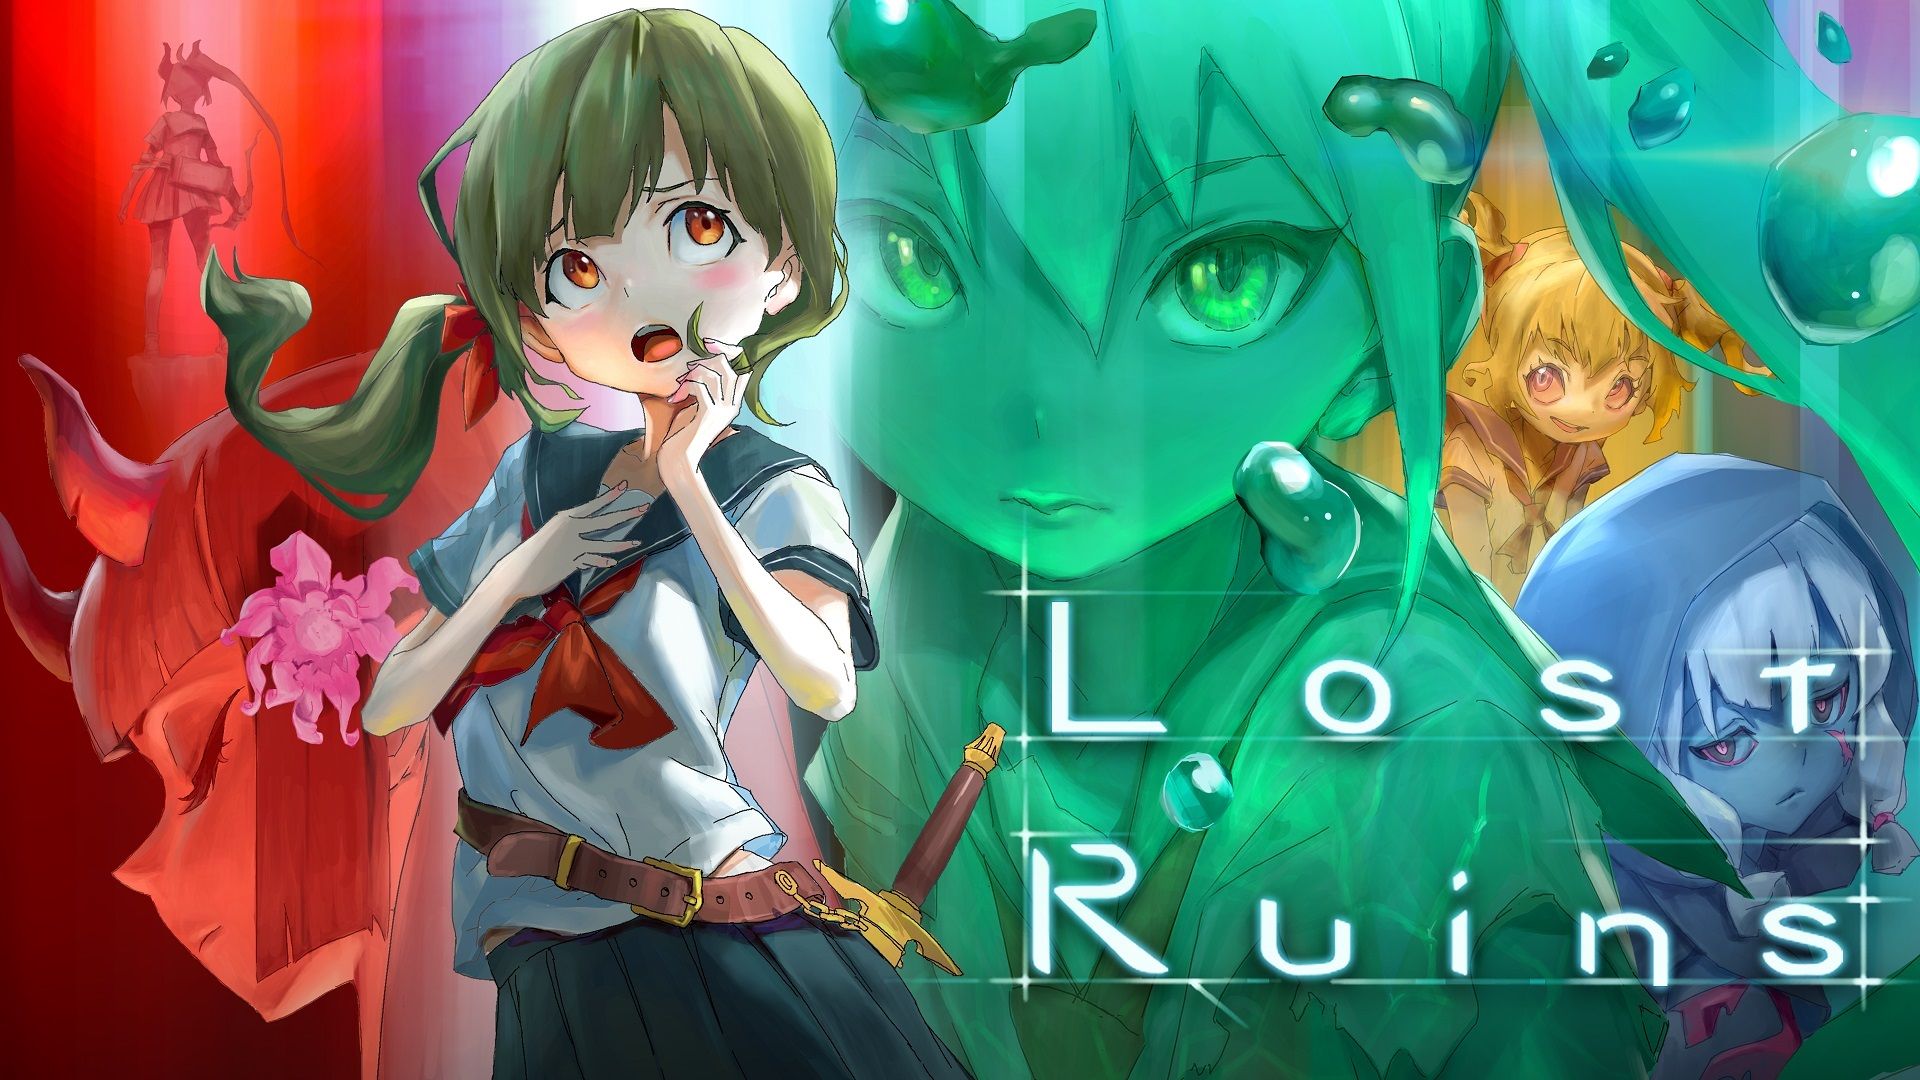 Lost Ruins Review: Castle Anime Souls And More!